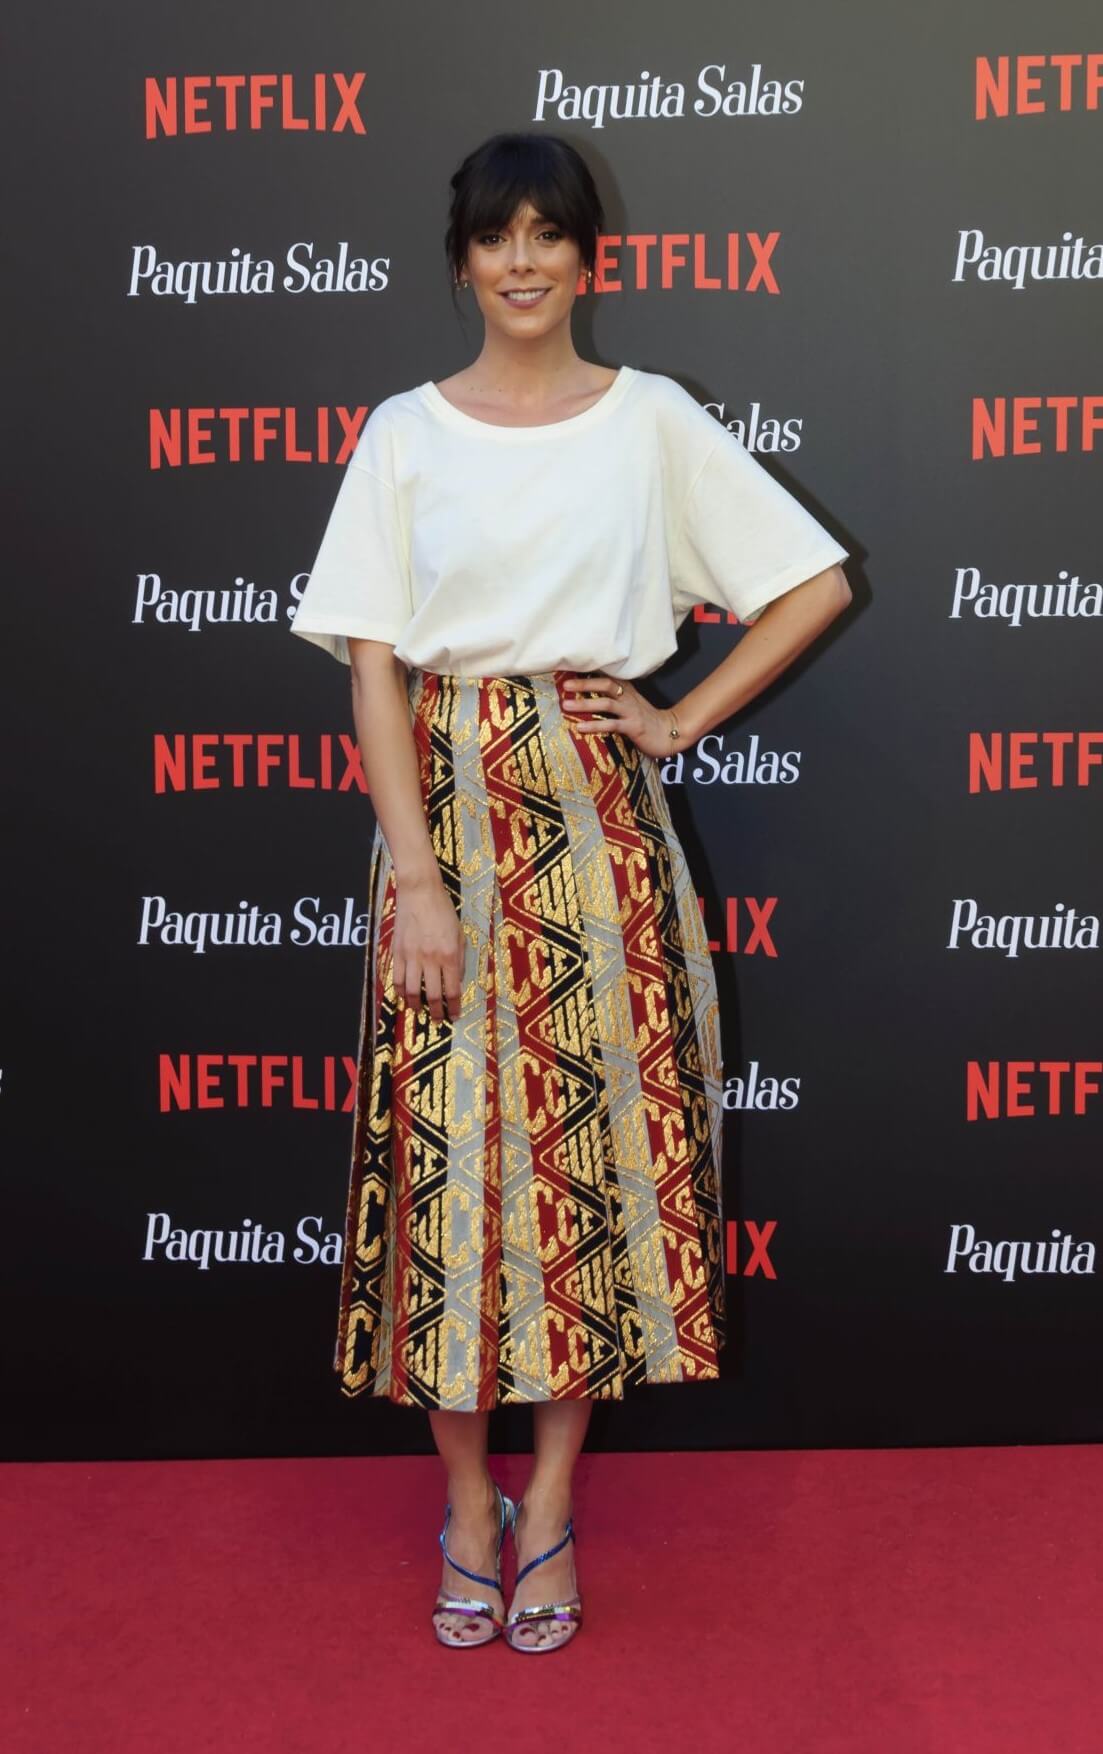 Belen Cuesta In Off White T-Shirt With Printed Long skirt At “Paquita Salas” Premiere in Madrid